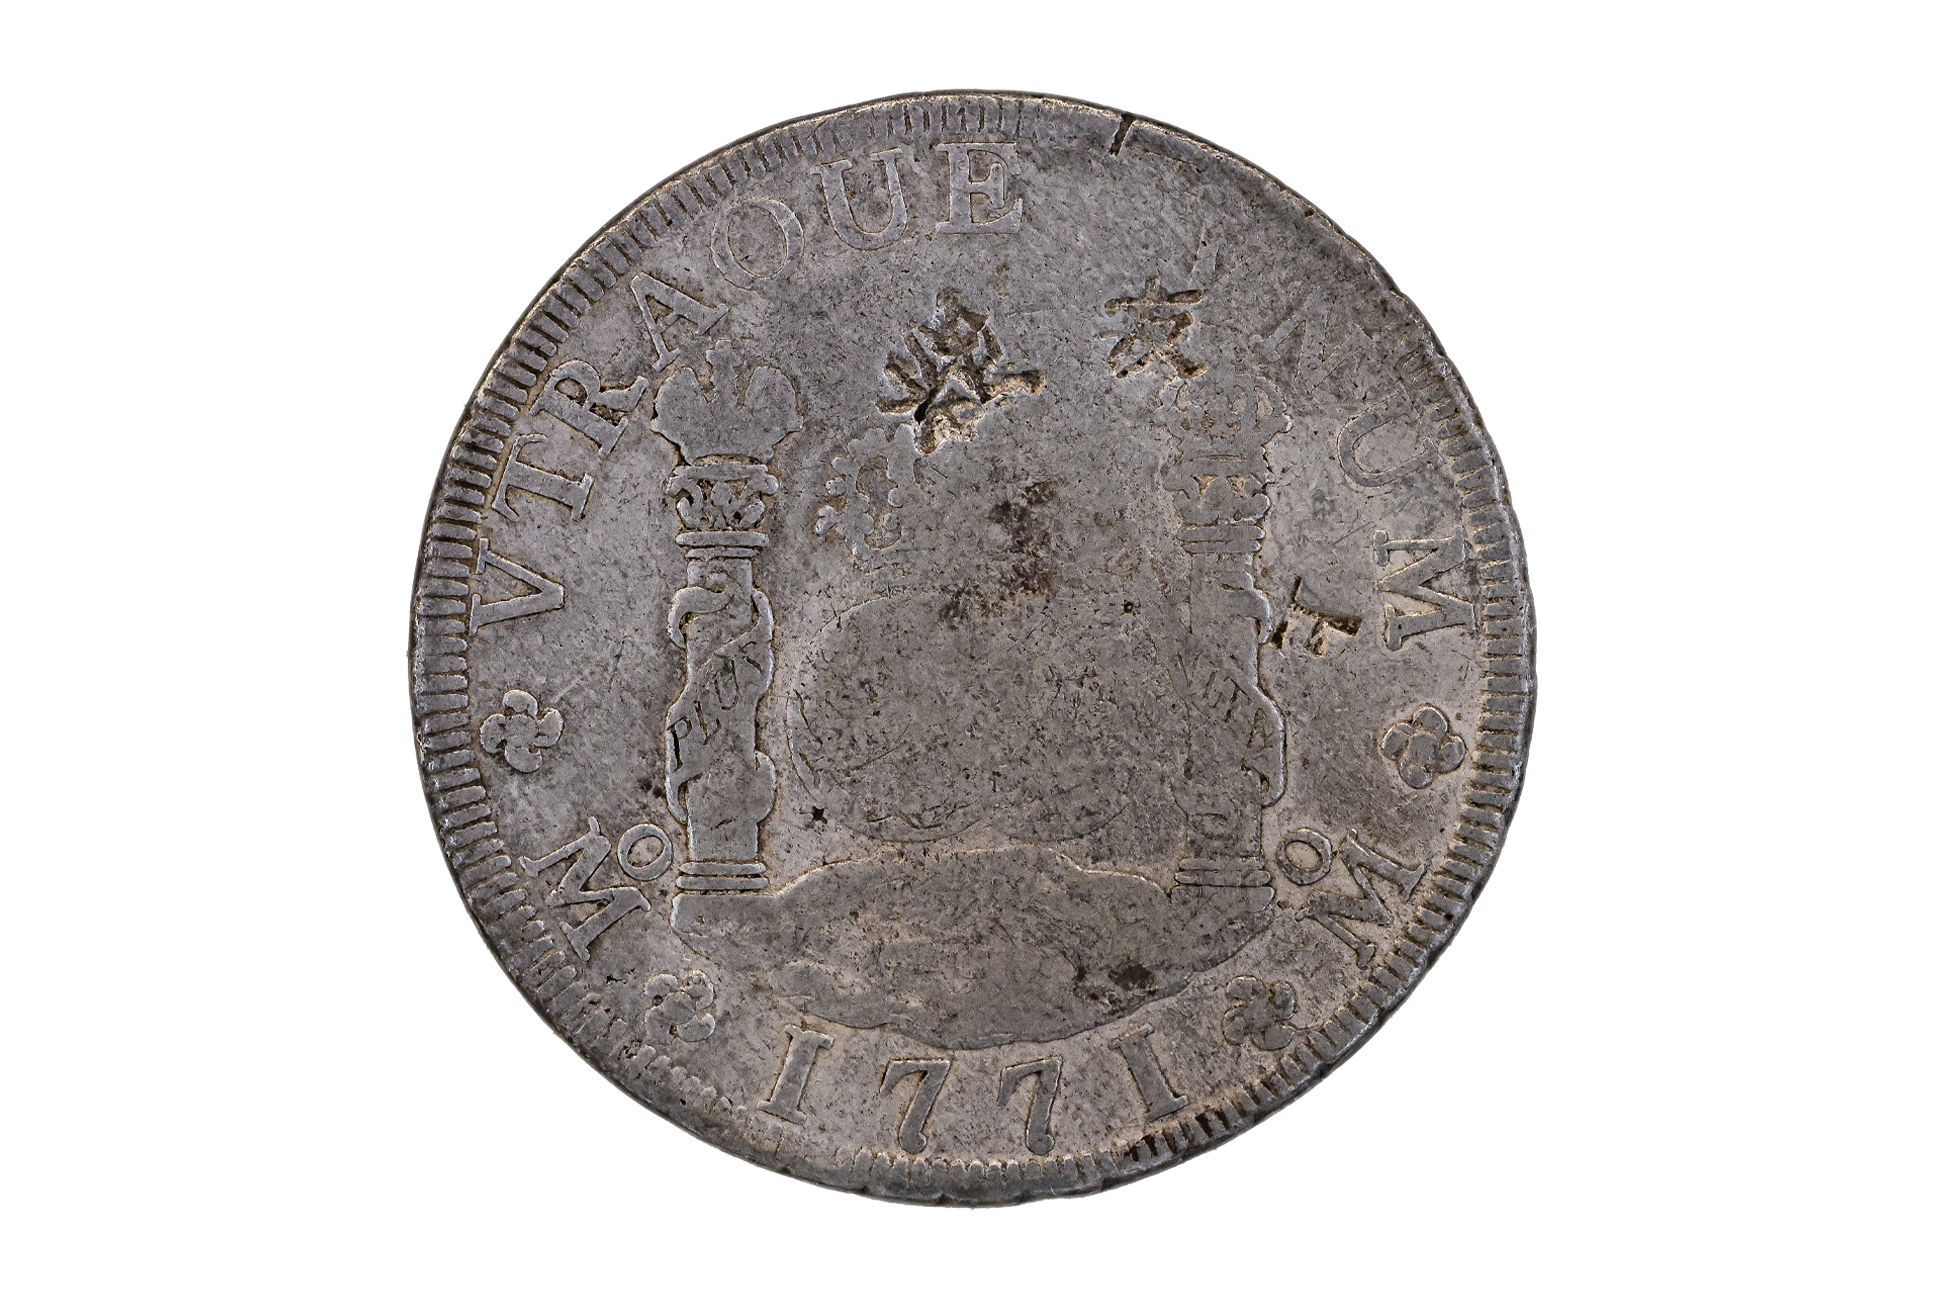 MEXICO 8 REALES PILLAR 1771 CHINESE COUNTERMARKS - Image 2 of 2